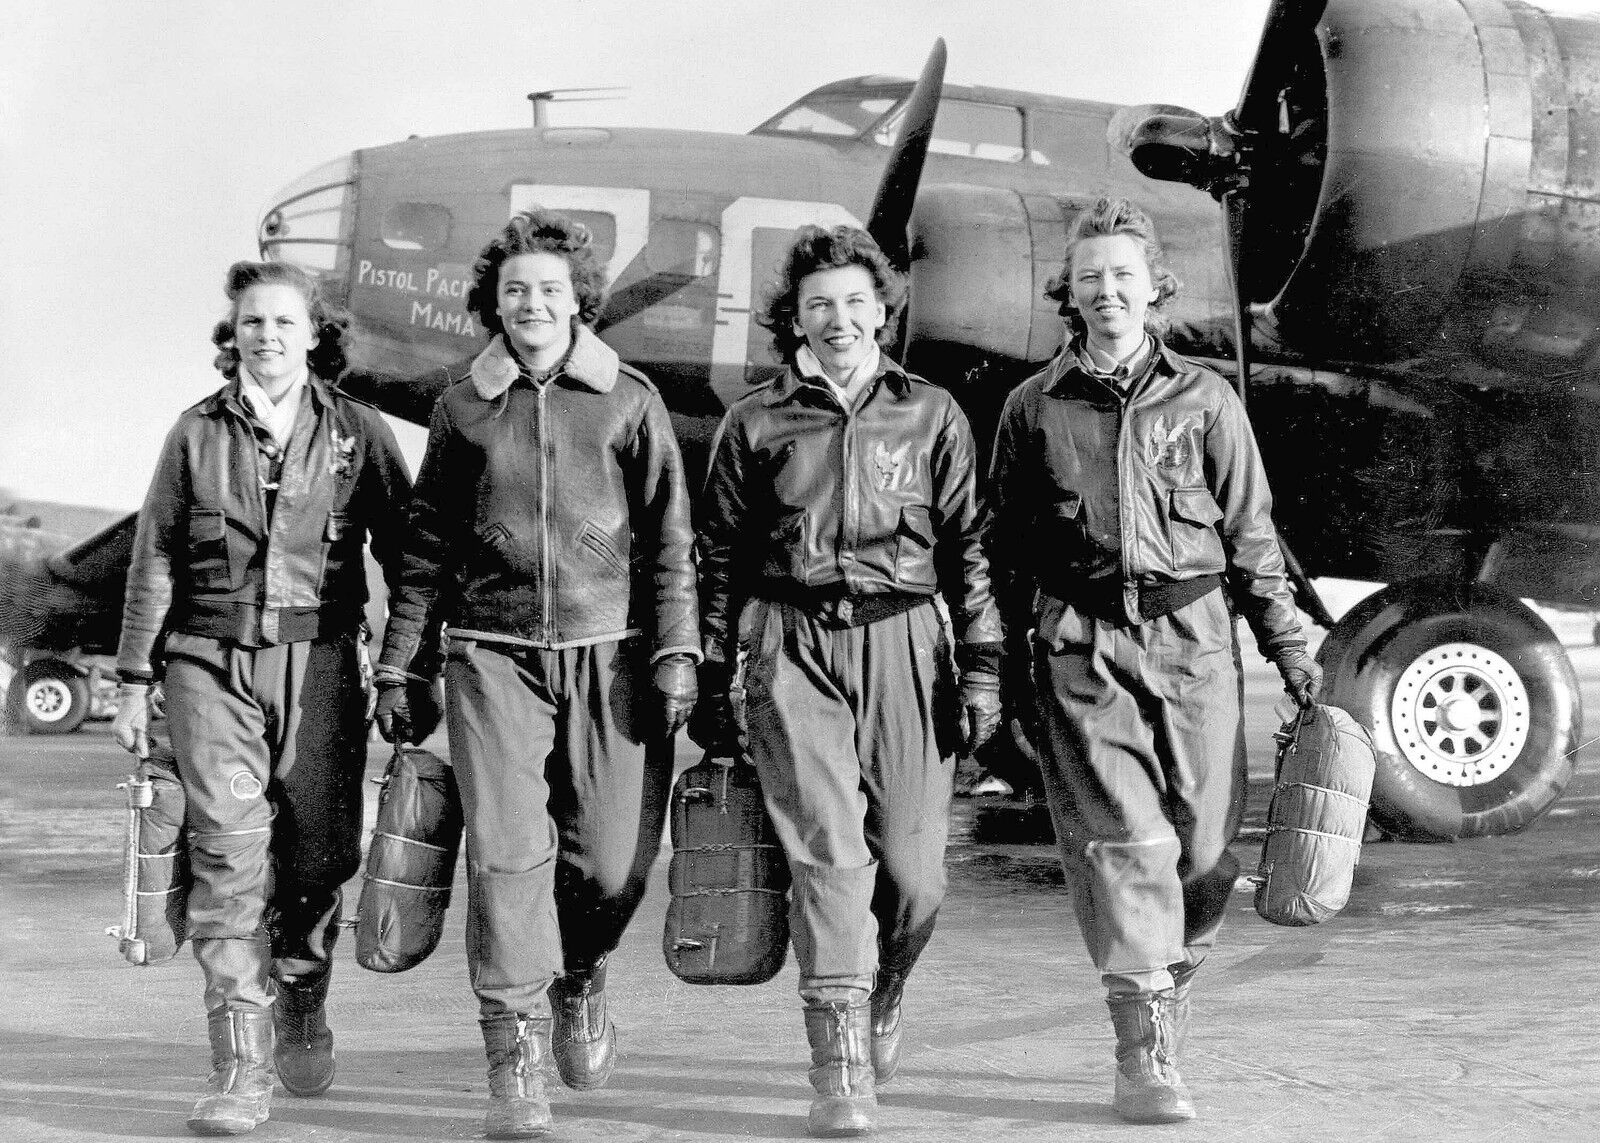 1942-Four Female Pilots Leaving their B-17 Flying Fortress Pistol Packin' Mama